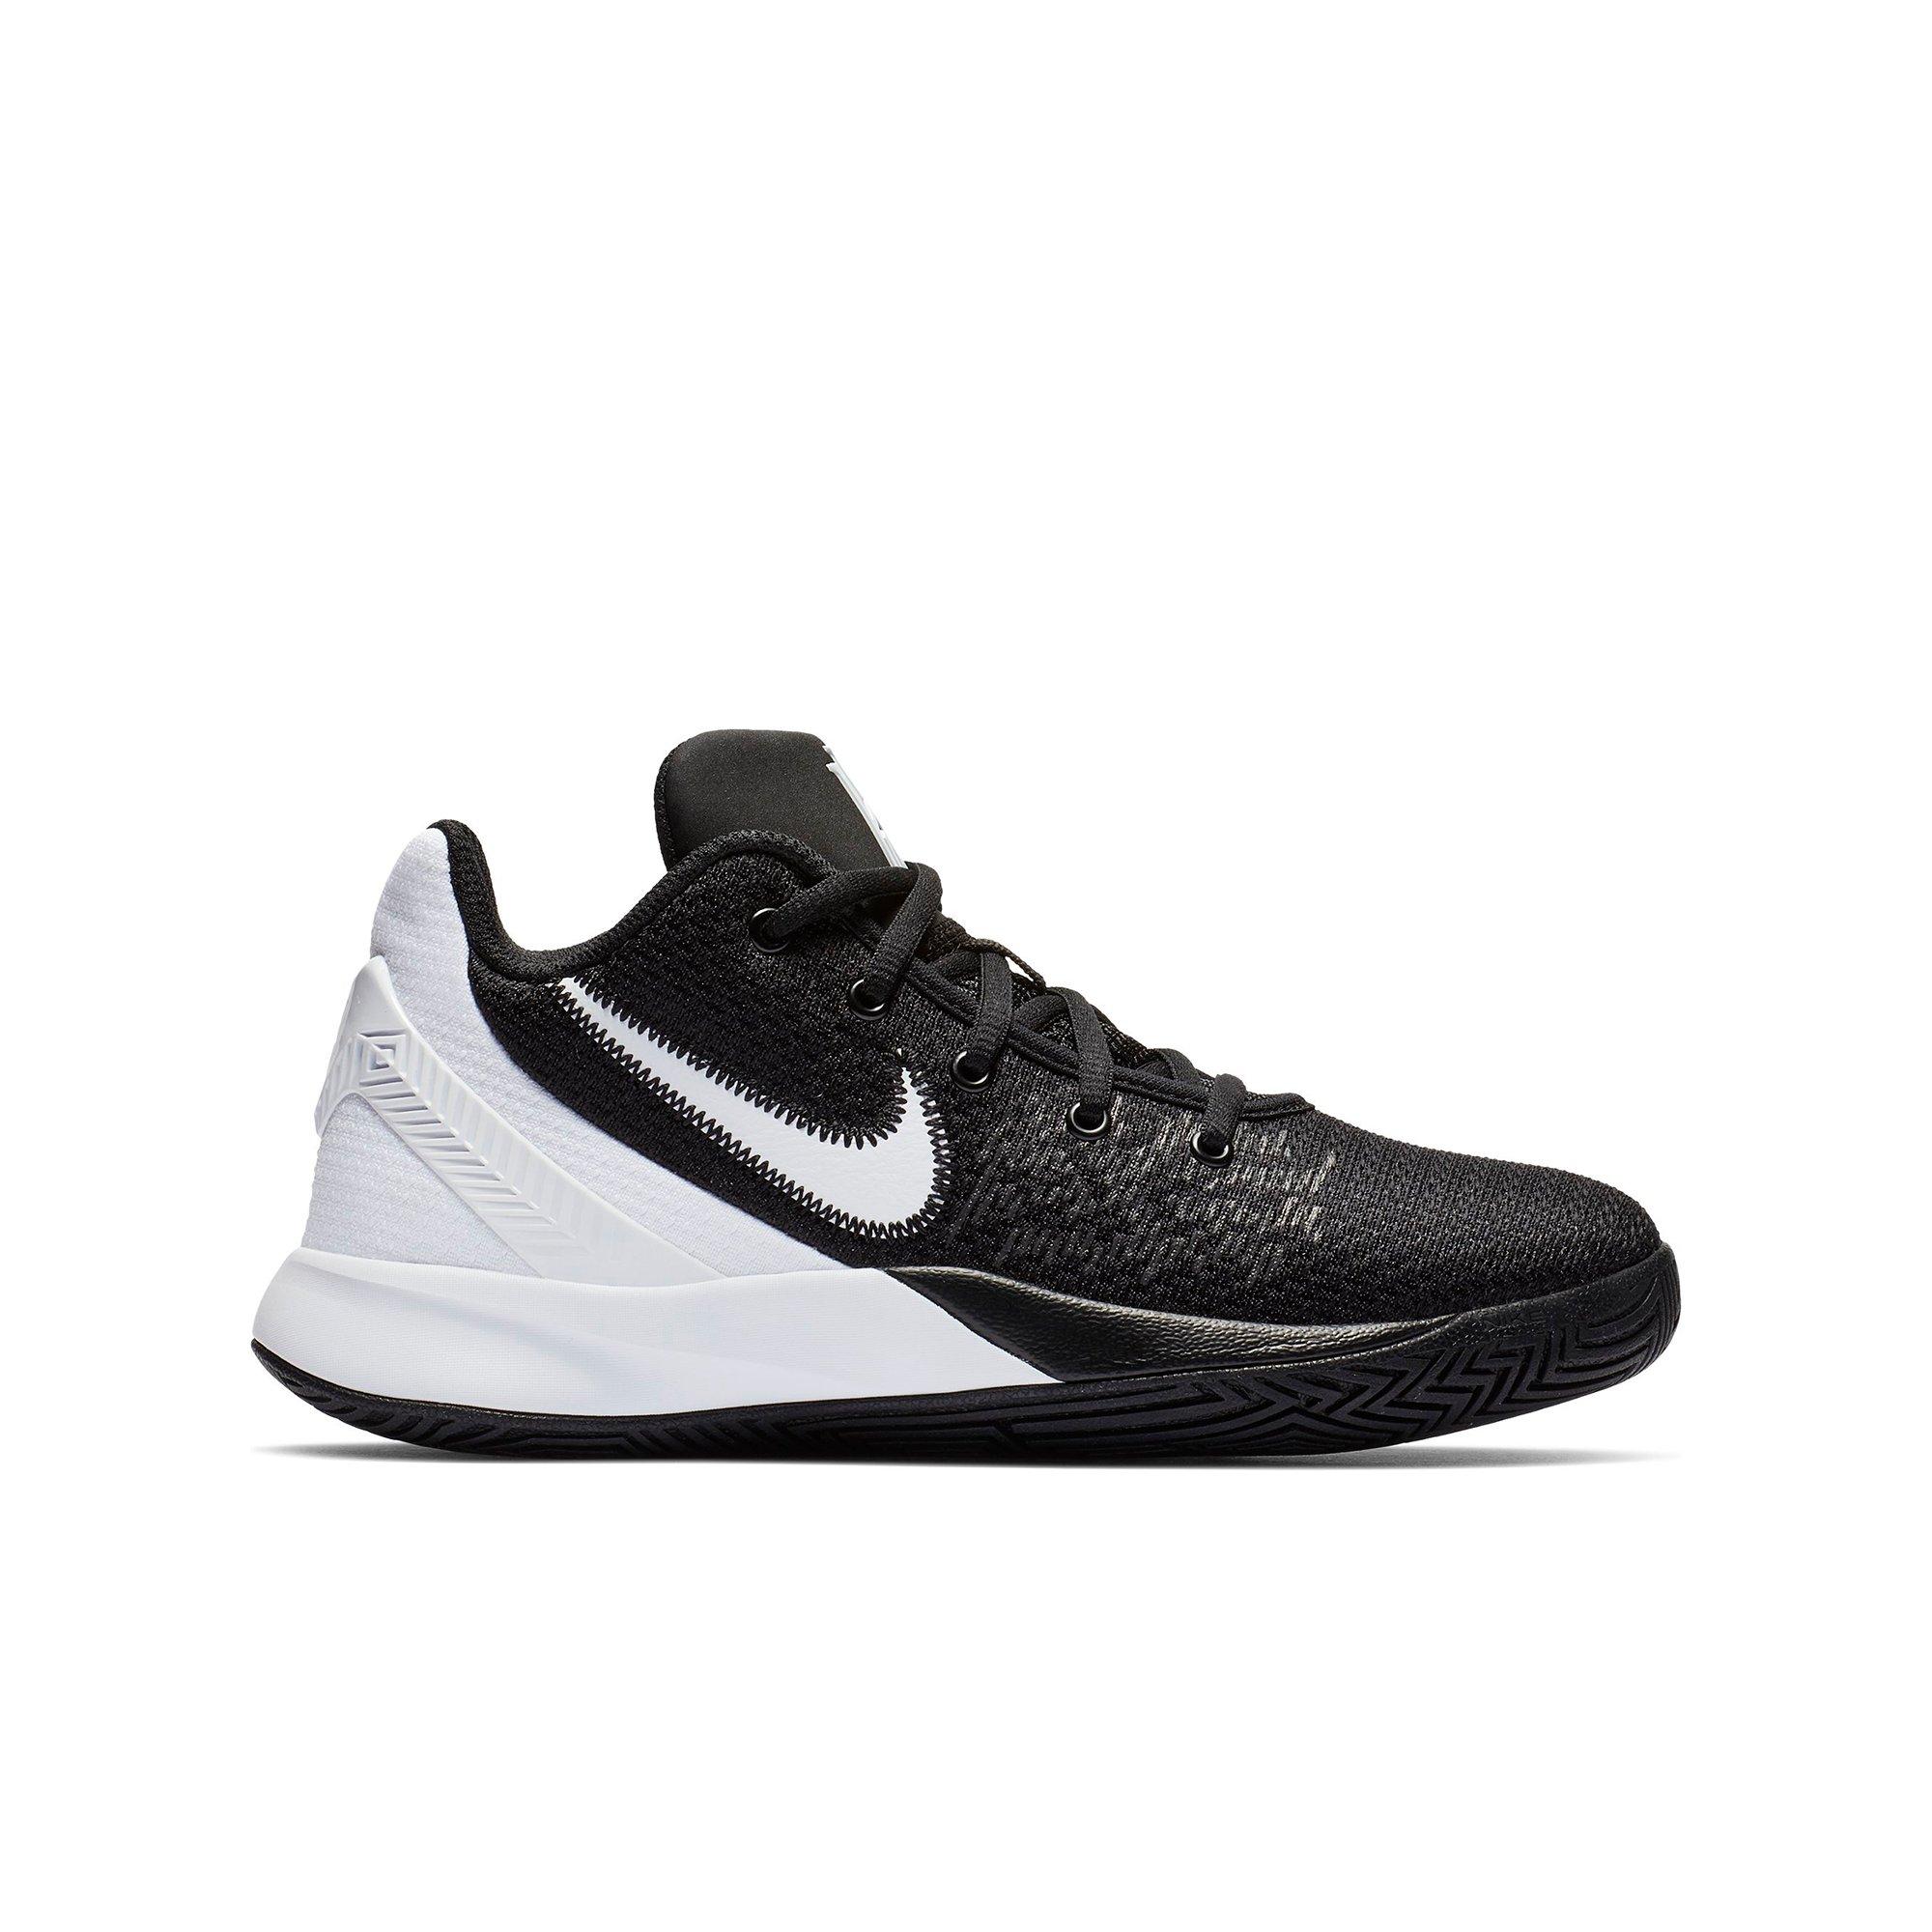 kyrie black and white basketball shoes